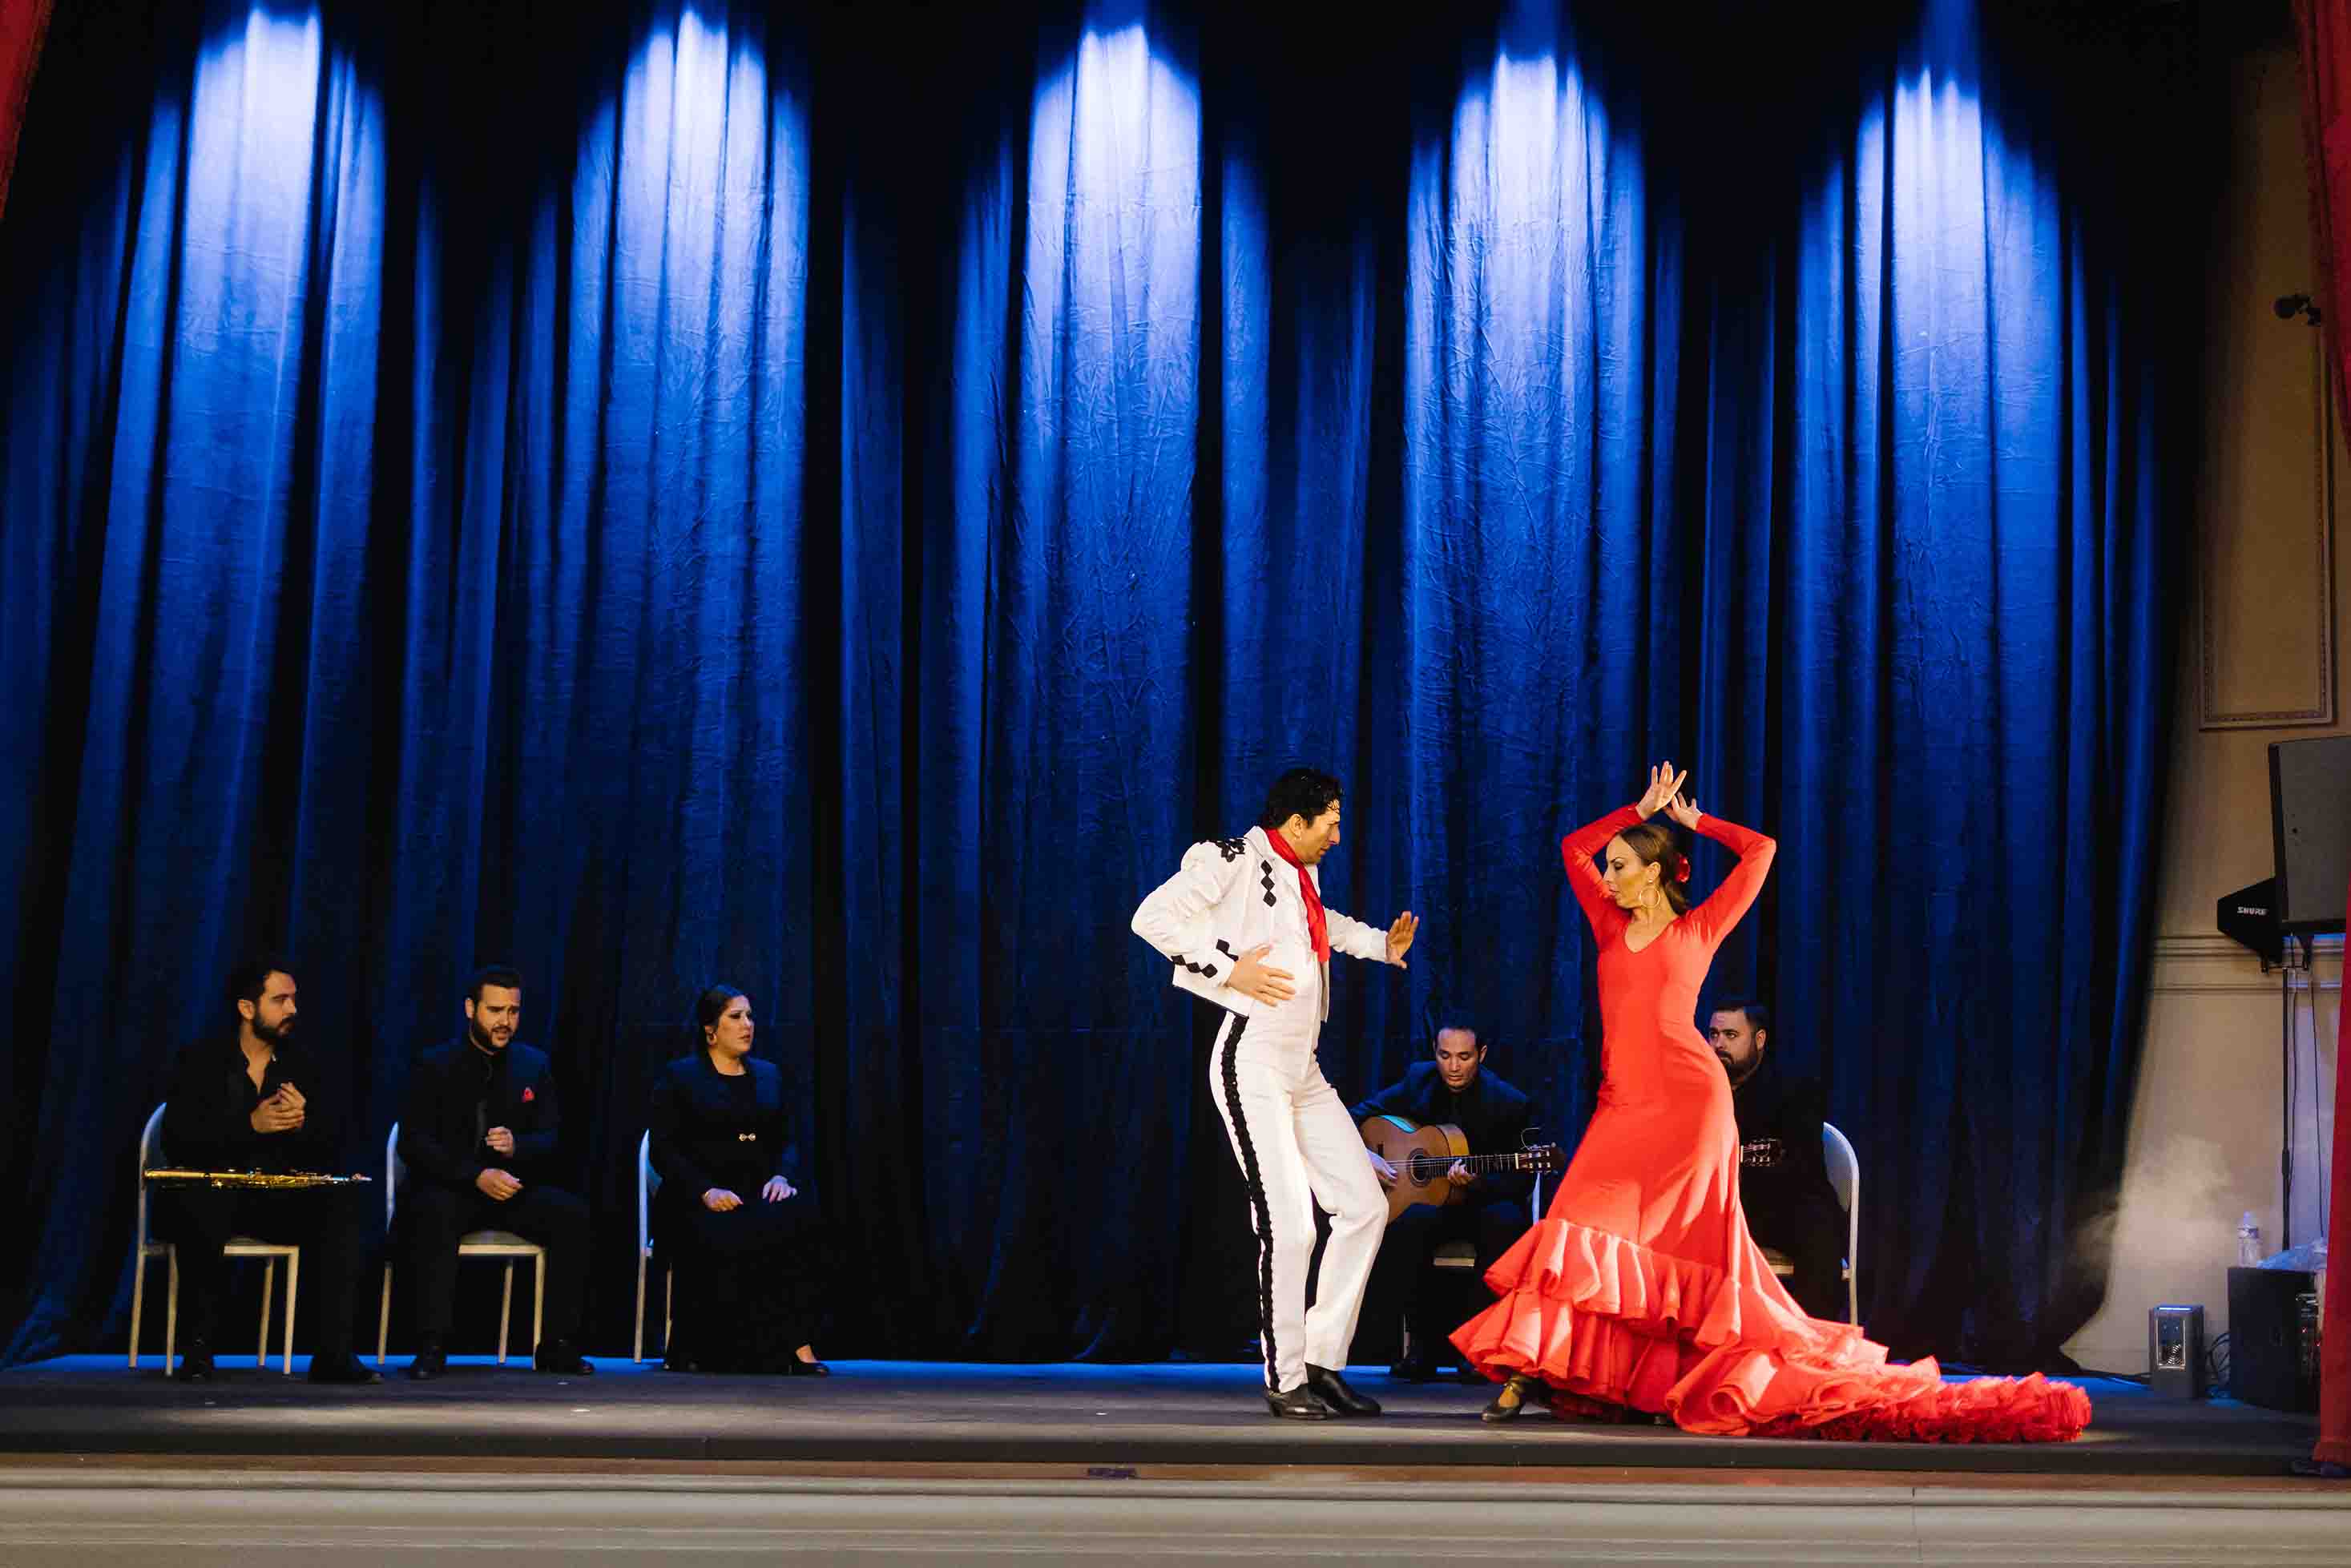 info-1 - Authentic Flamenco in Boston: A Traditional Spanish Show